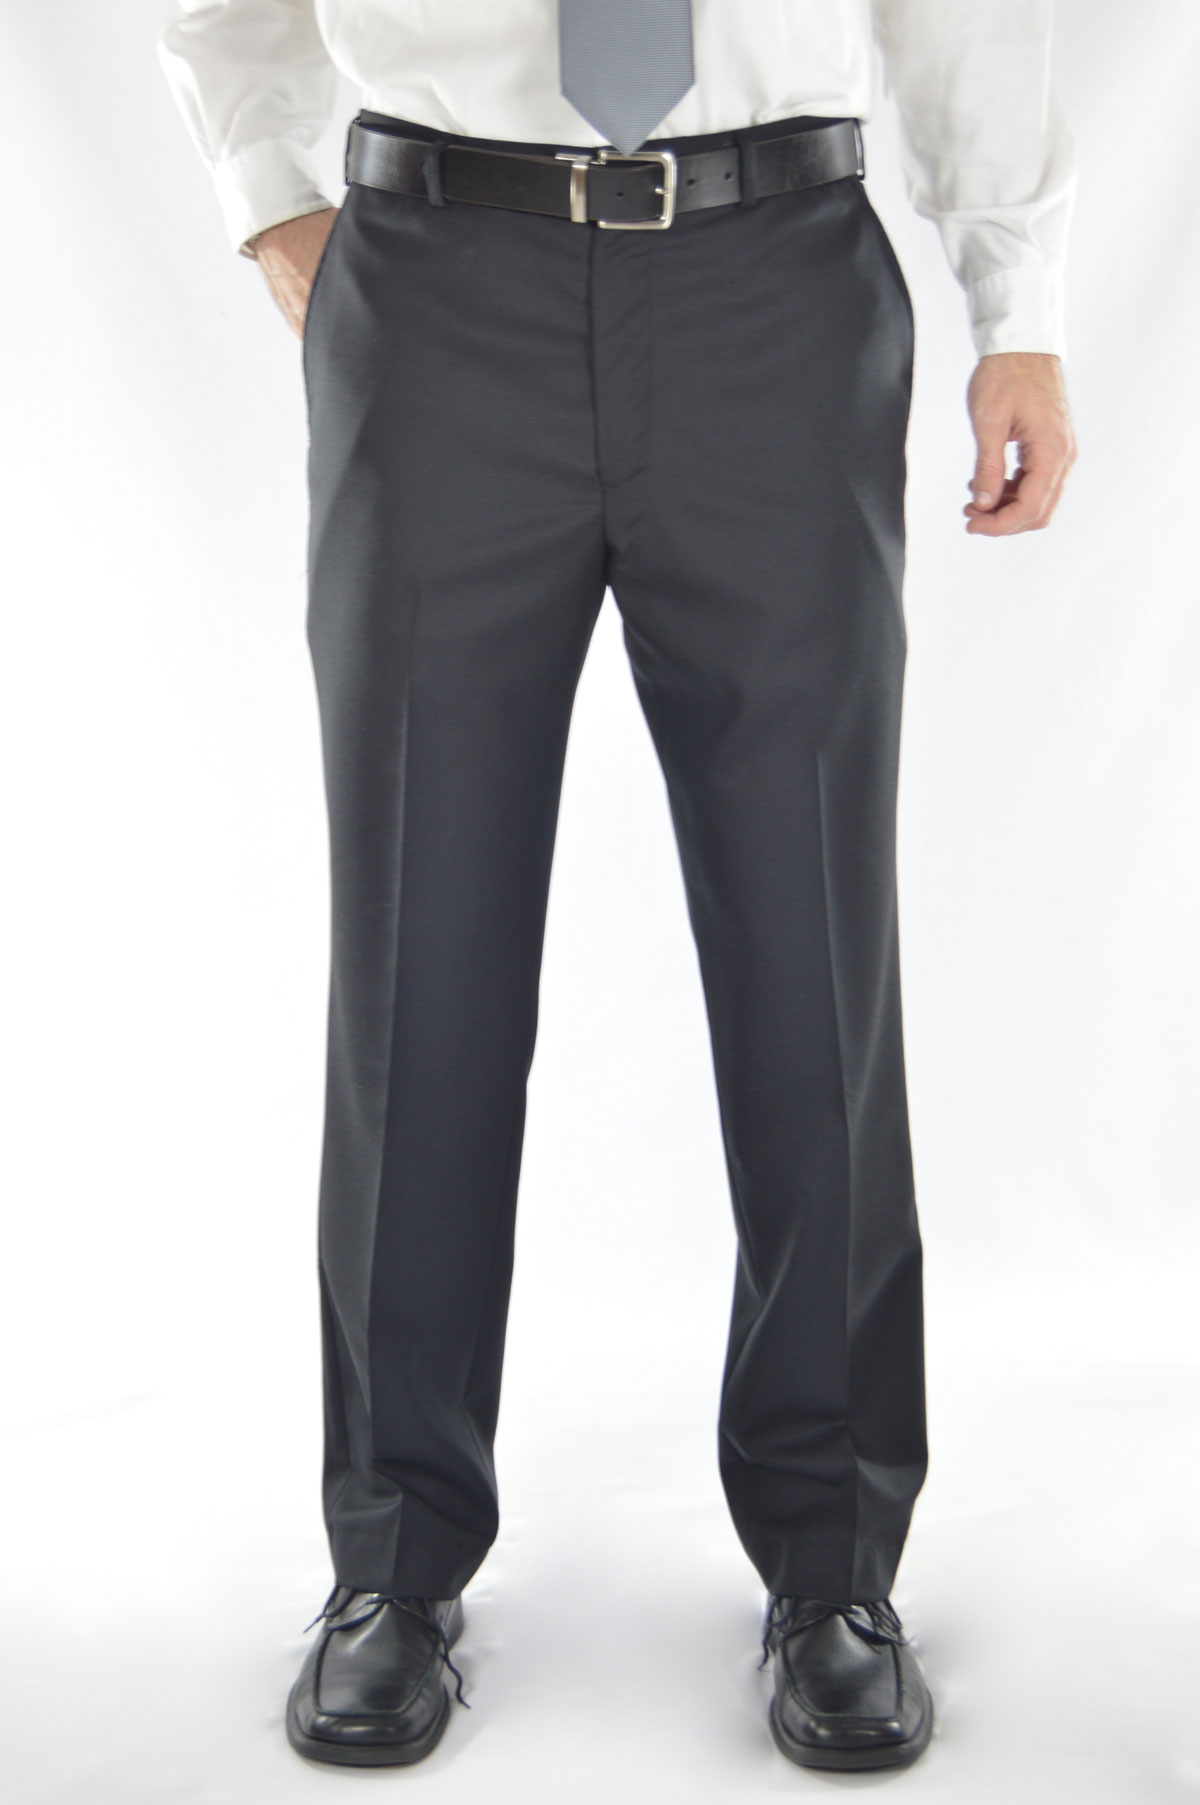 New Fine Worsted Wool Trousers by DUGDALE | Trousers | Germain Tailors